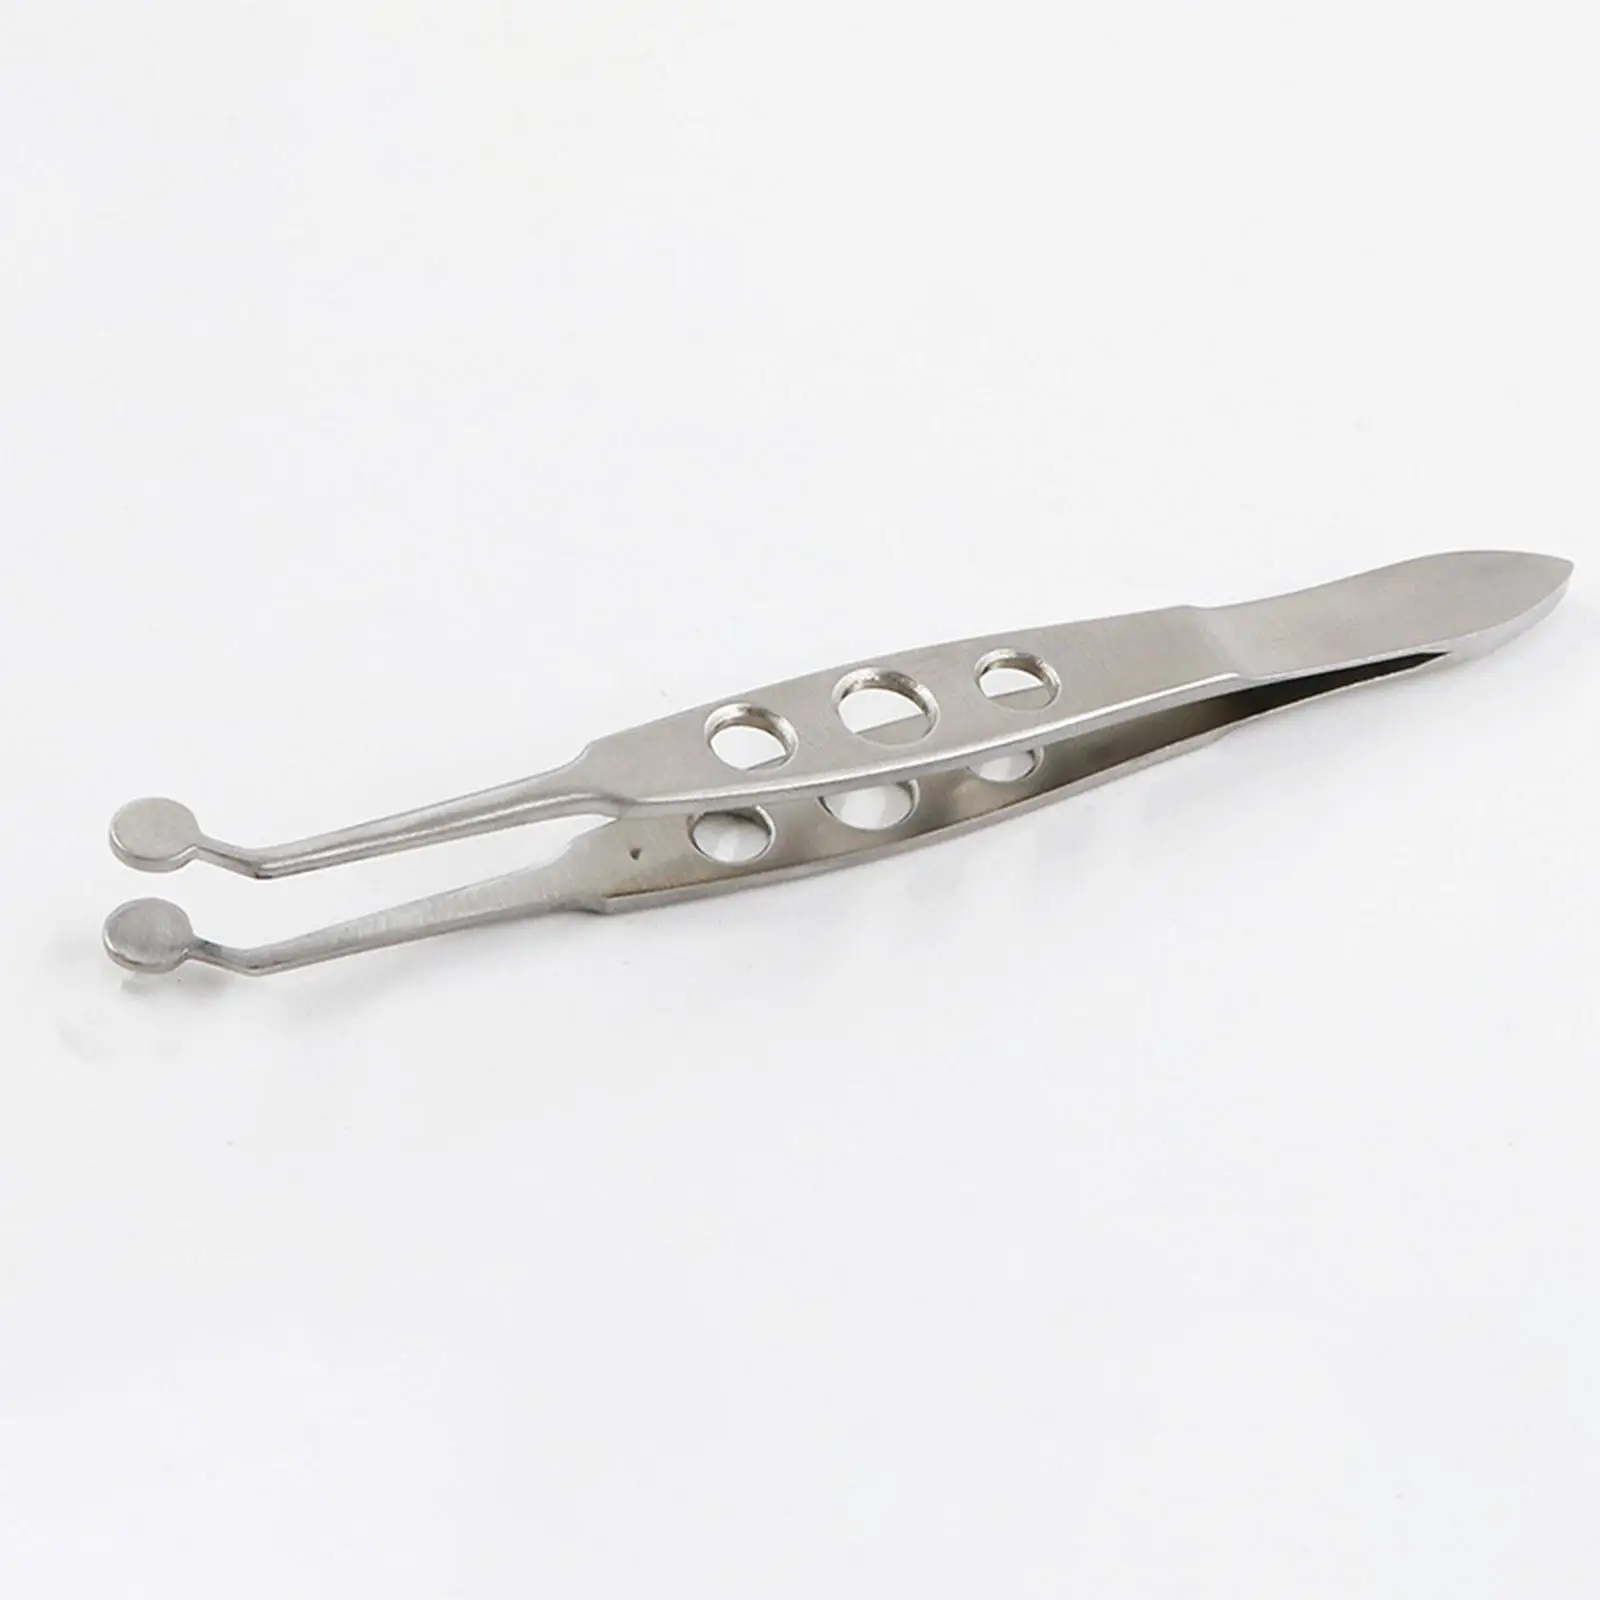 Meibomian Gland Expressor Forceps Ophthalmological Stainless Steel Tweezer Tools Clip for Palpebral Gland Massage Meibomian Flap